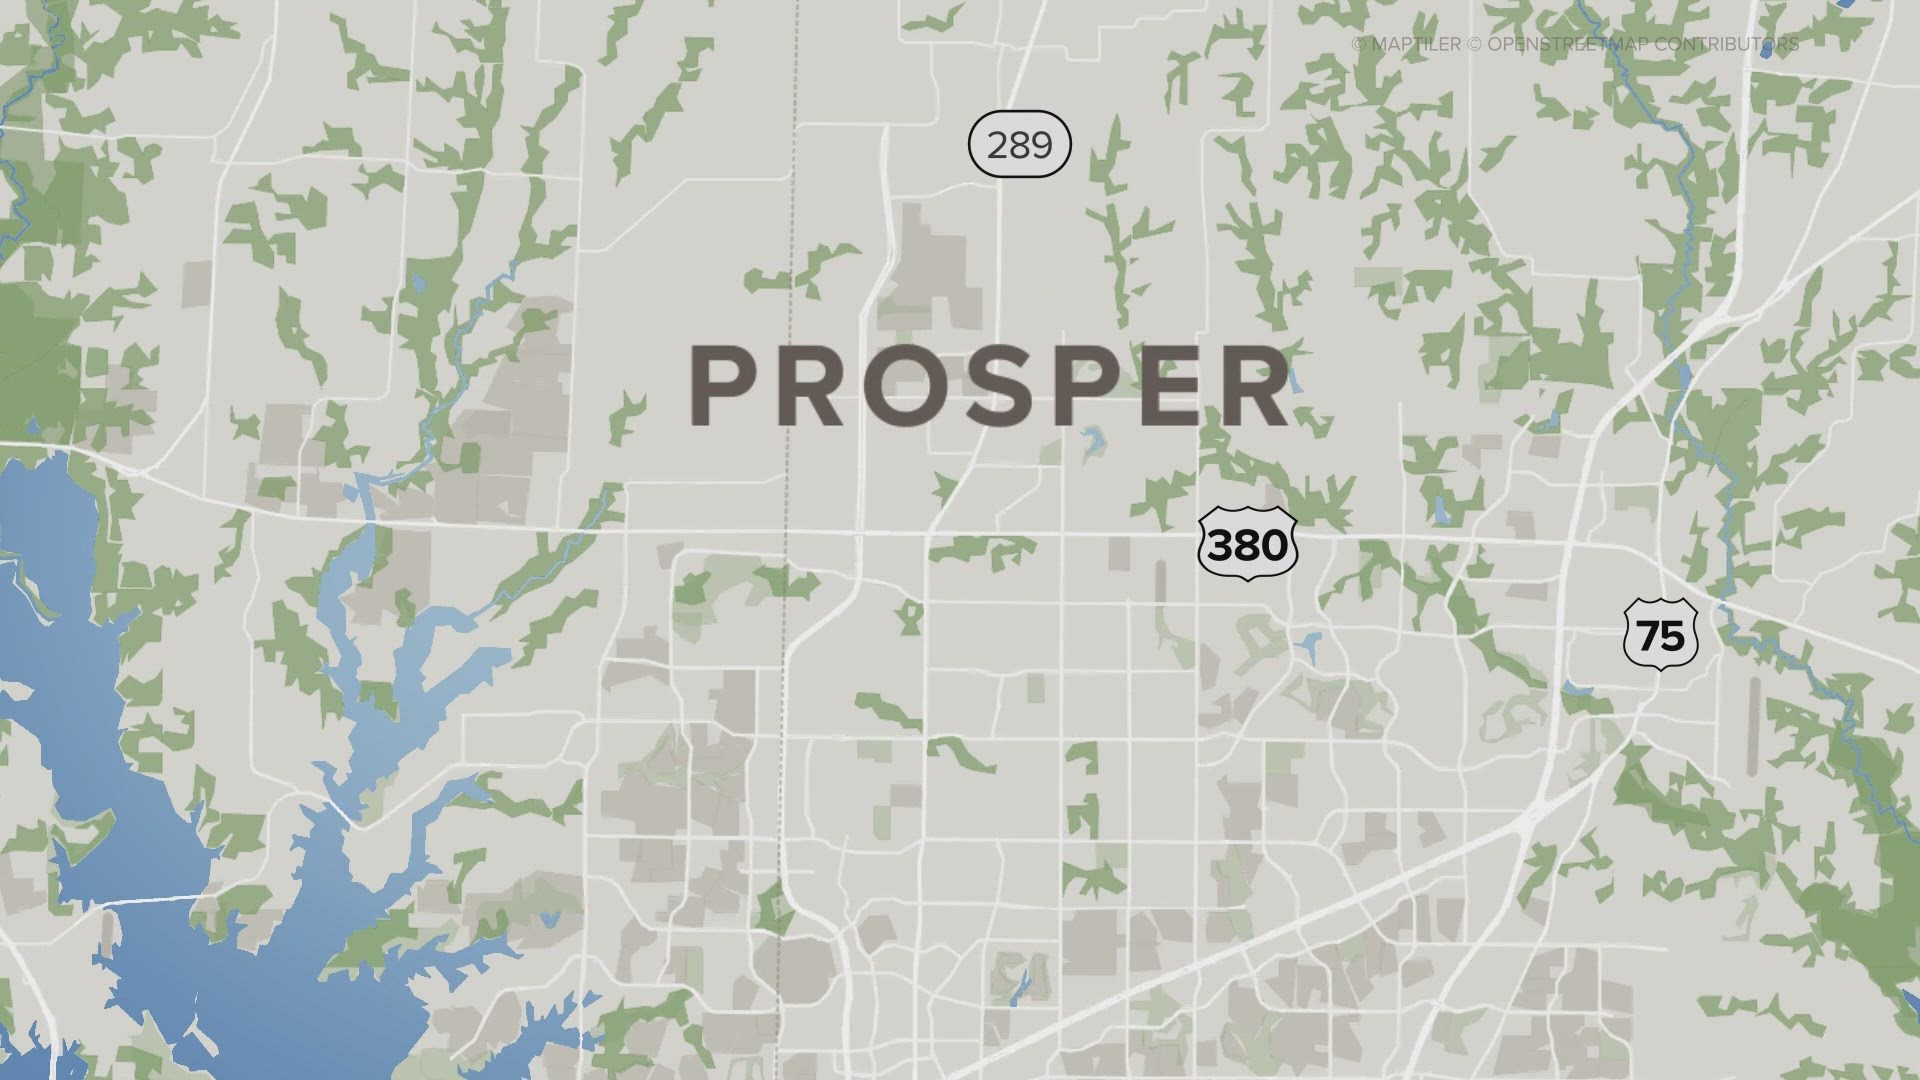 In a letter to families, the district said one student made a post against Prosper High School. The other allegedly threatened the Town of Prosper and Frisco.